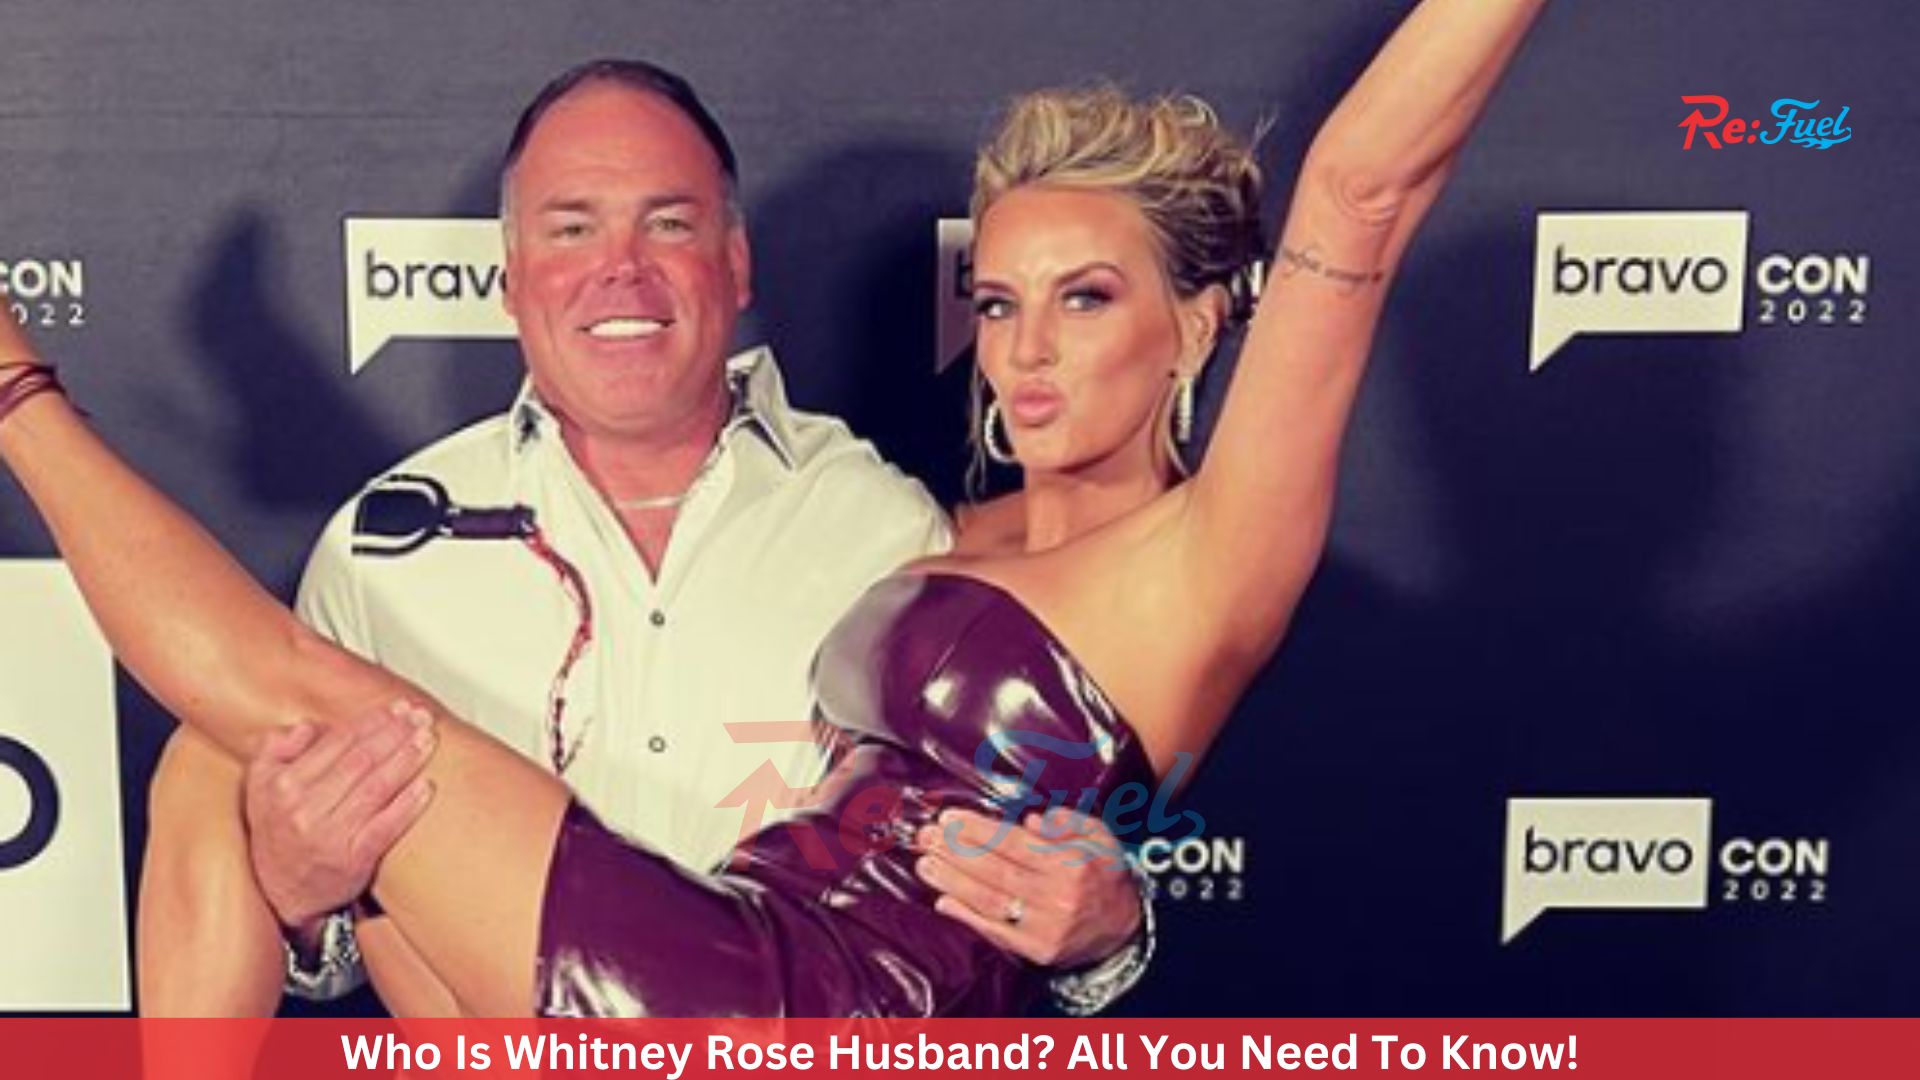 Who Is Whitney Rose Husband? All You Need To Know!